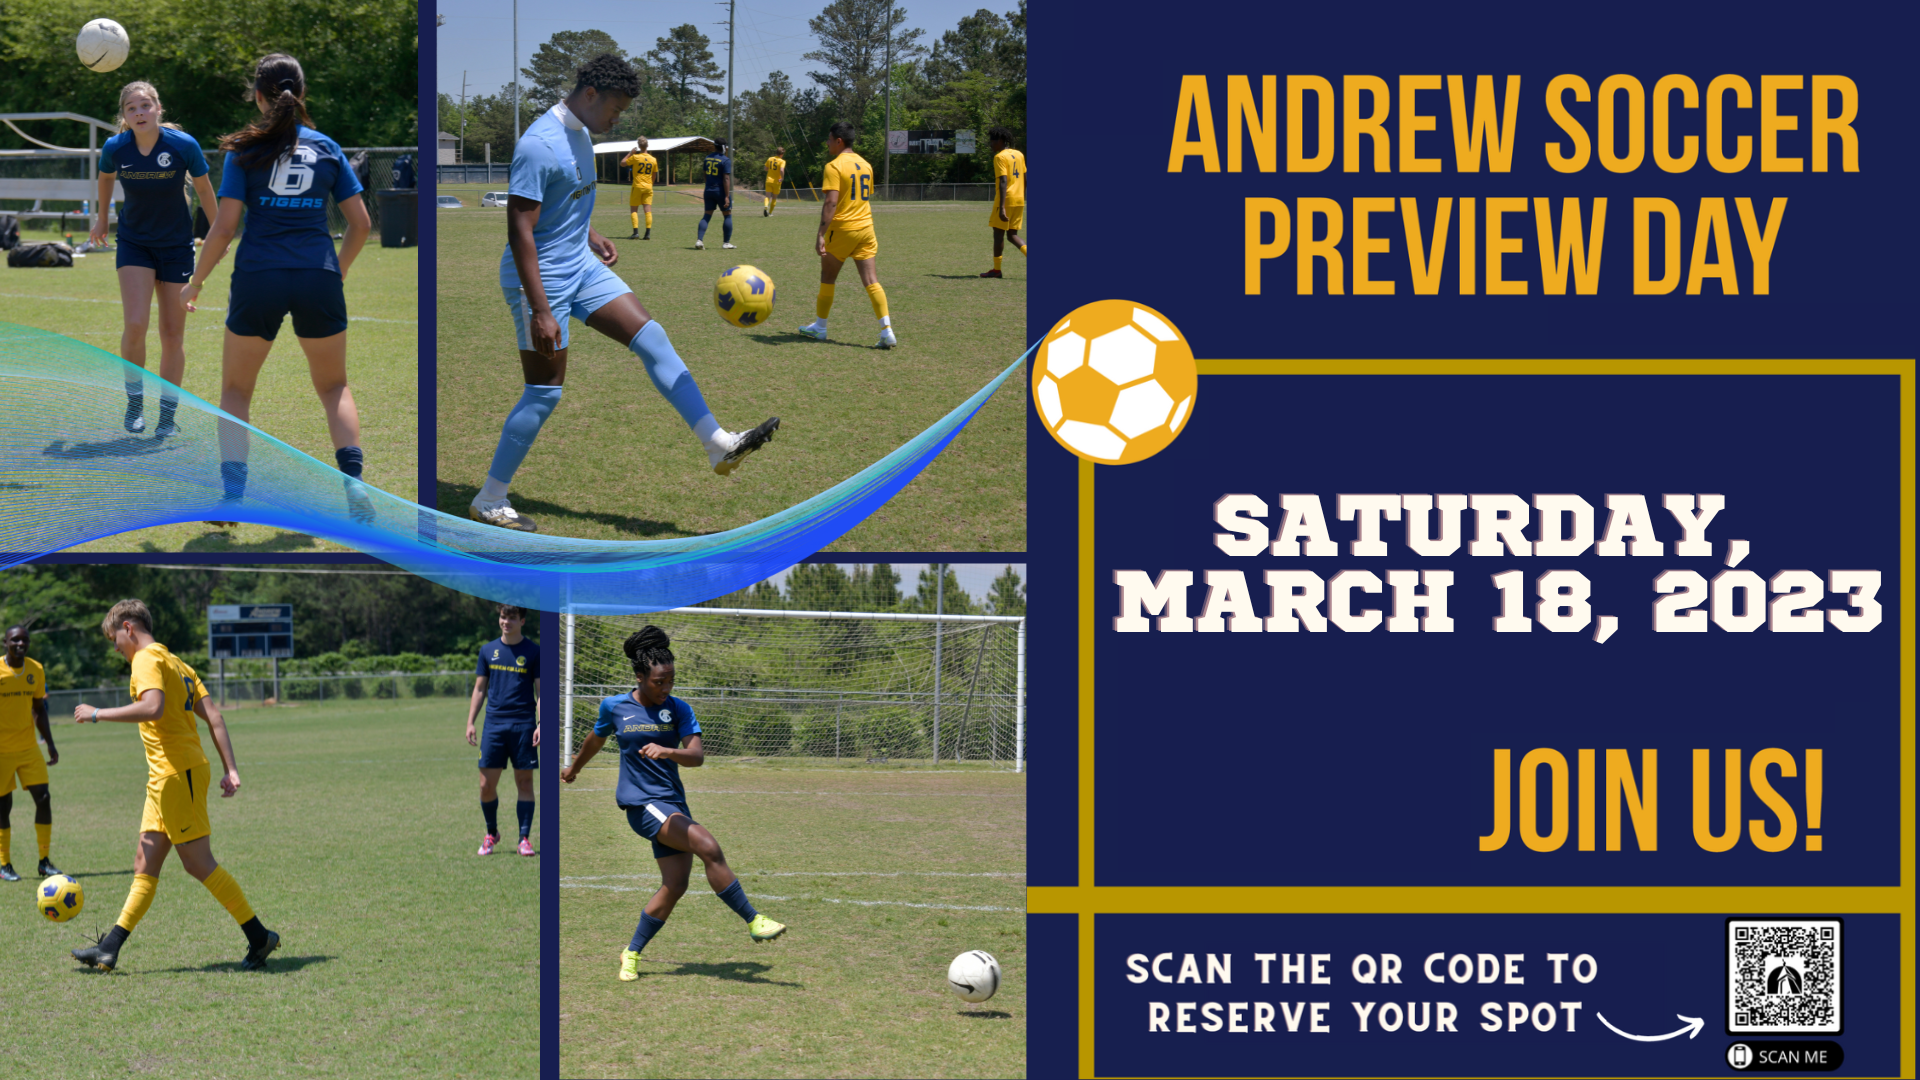 Graphic announcing Andrew College Men's And Women's Soccer Preview Day and schedule for March 18.  To register, email kylegriffith@andrewcollege.edu or adamredhead@andrewcollege.edu.